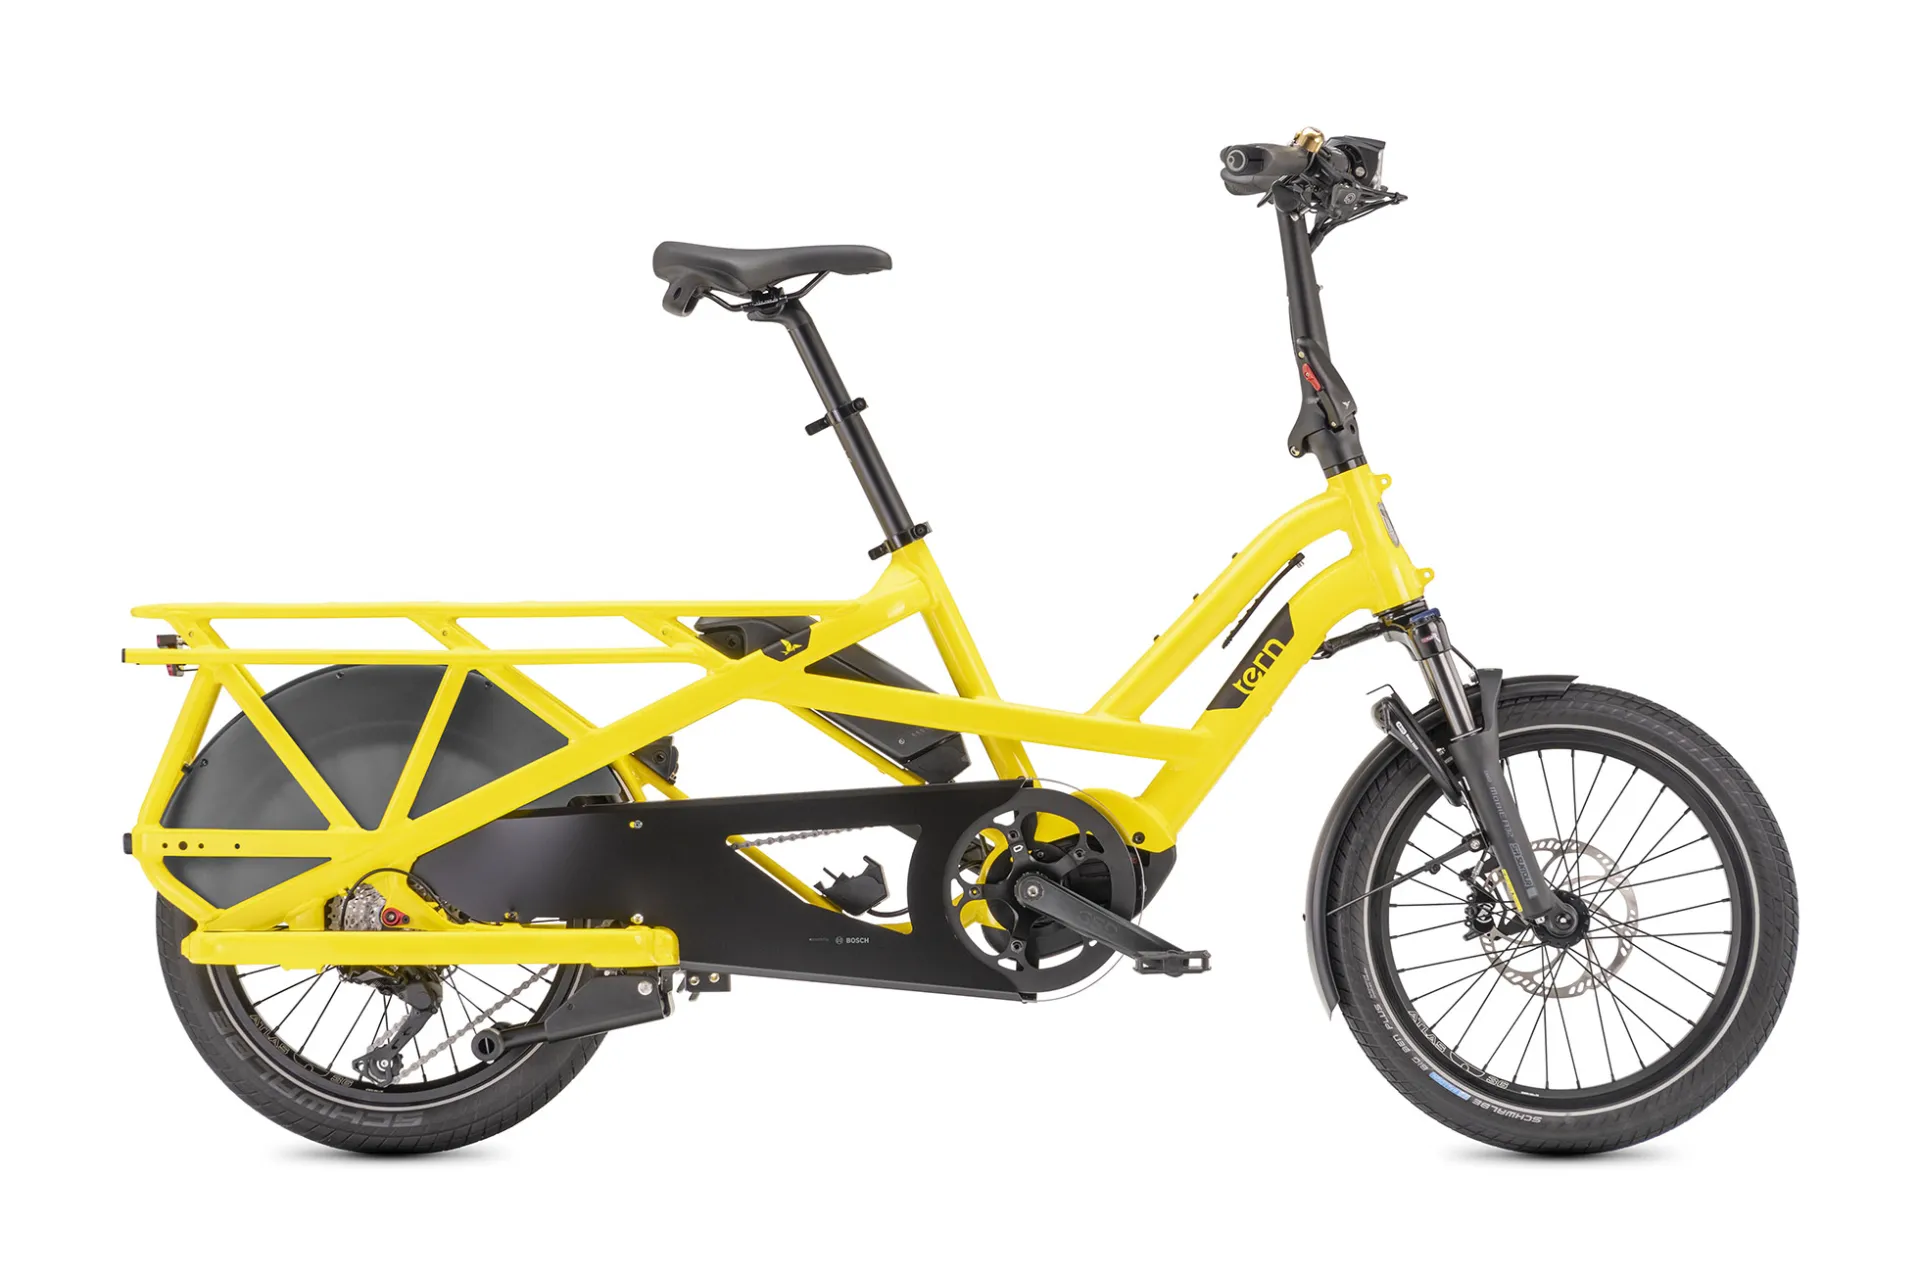 GSD S10: Our Most Popular Electric Cargo Bike